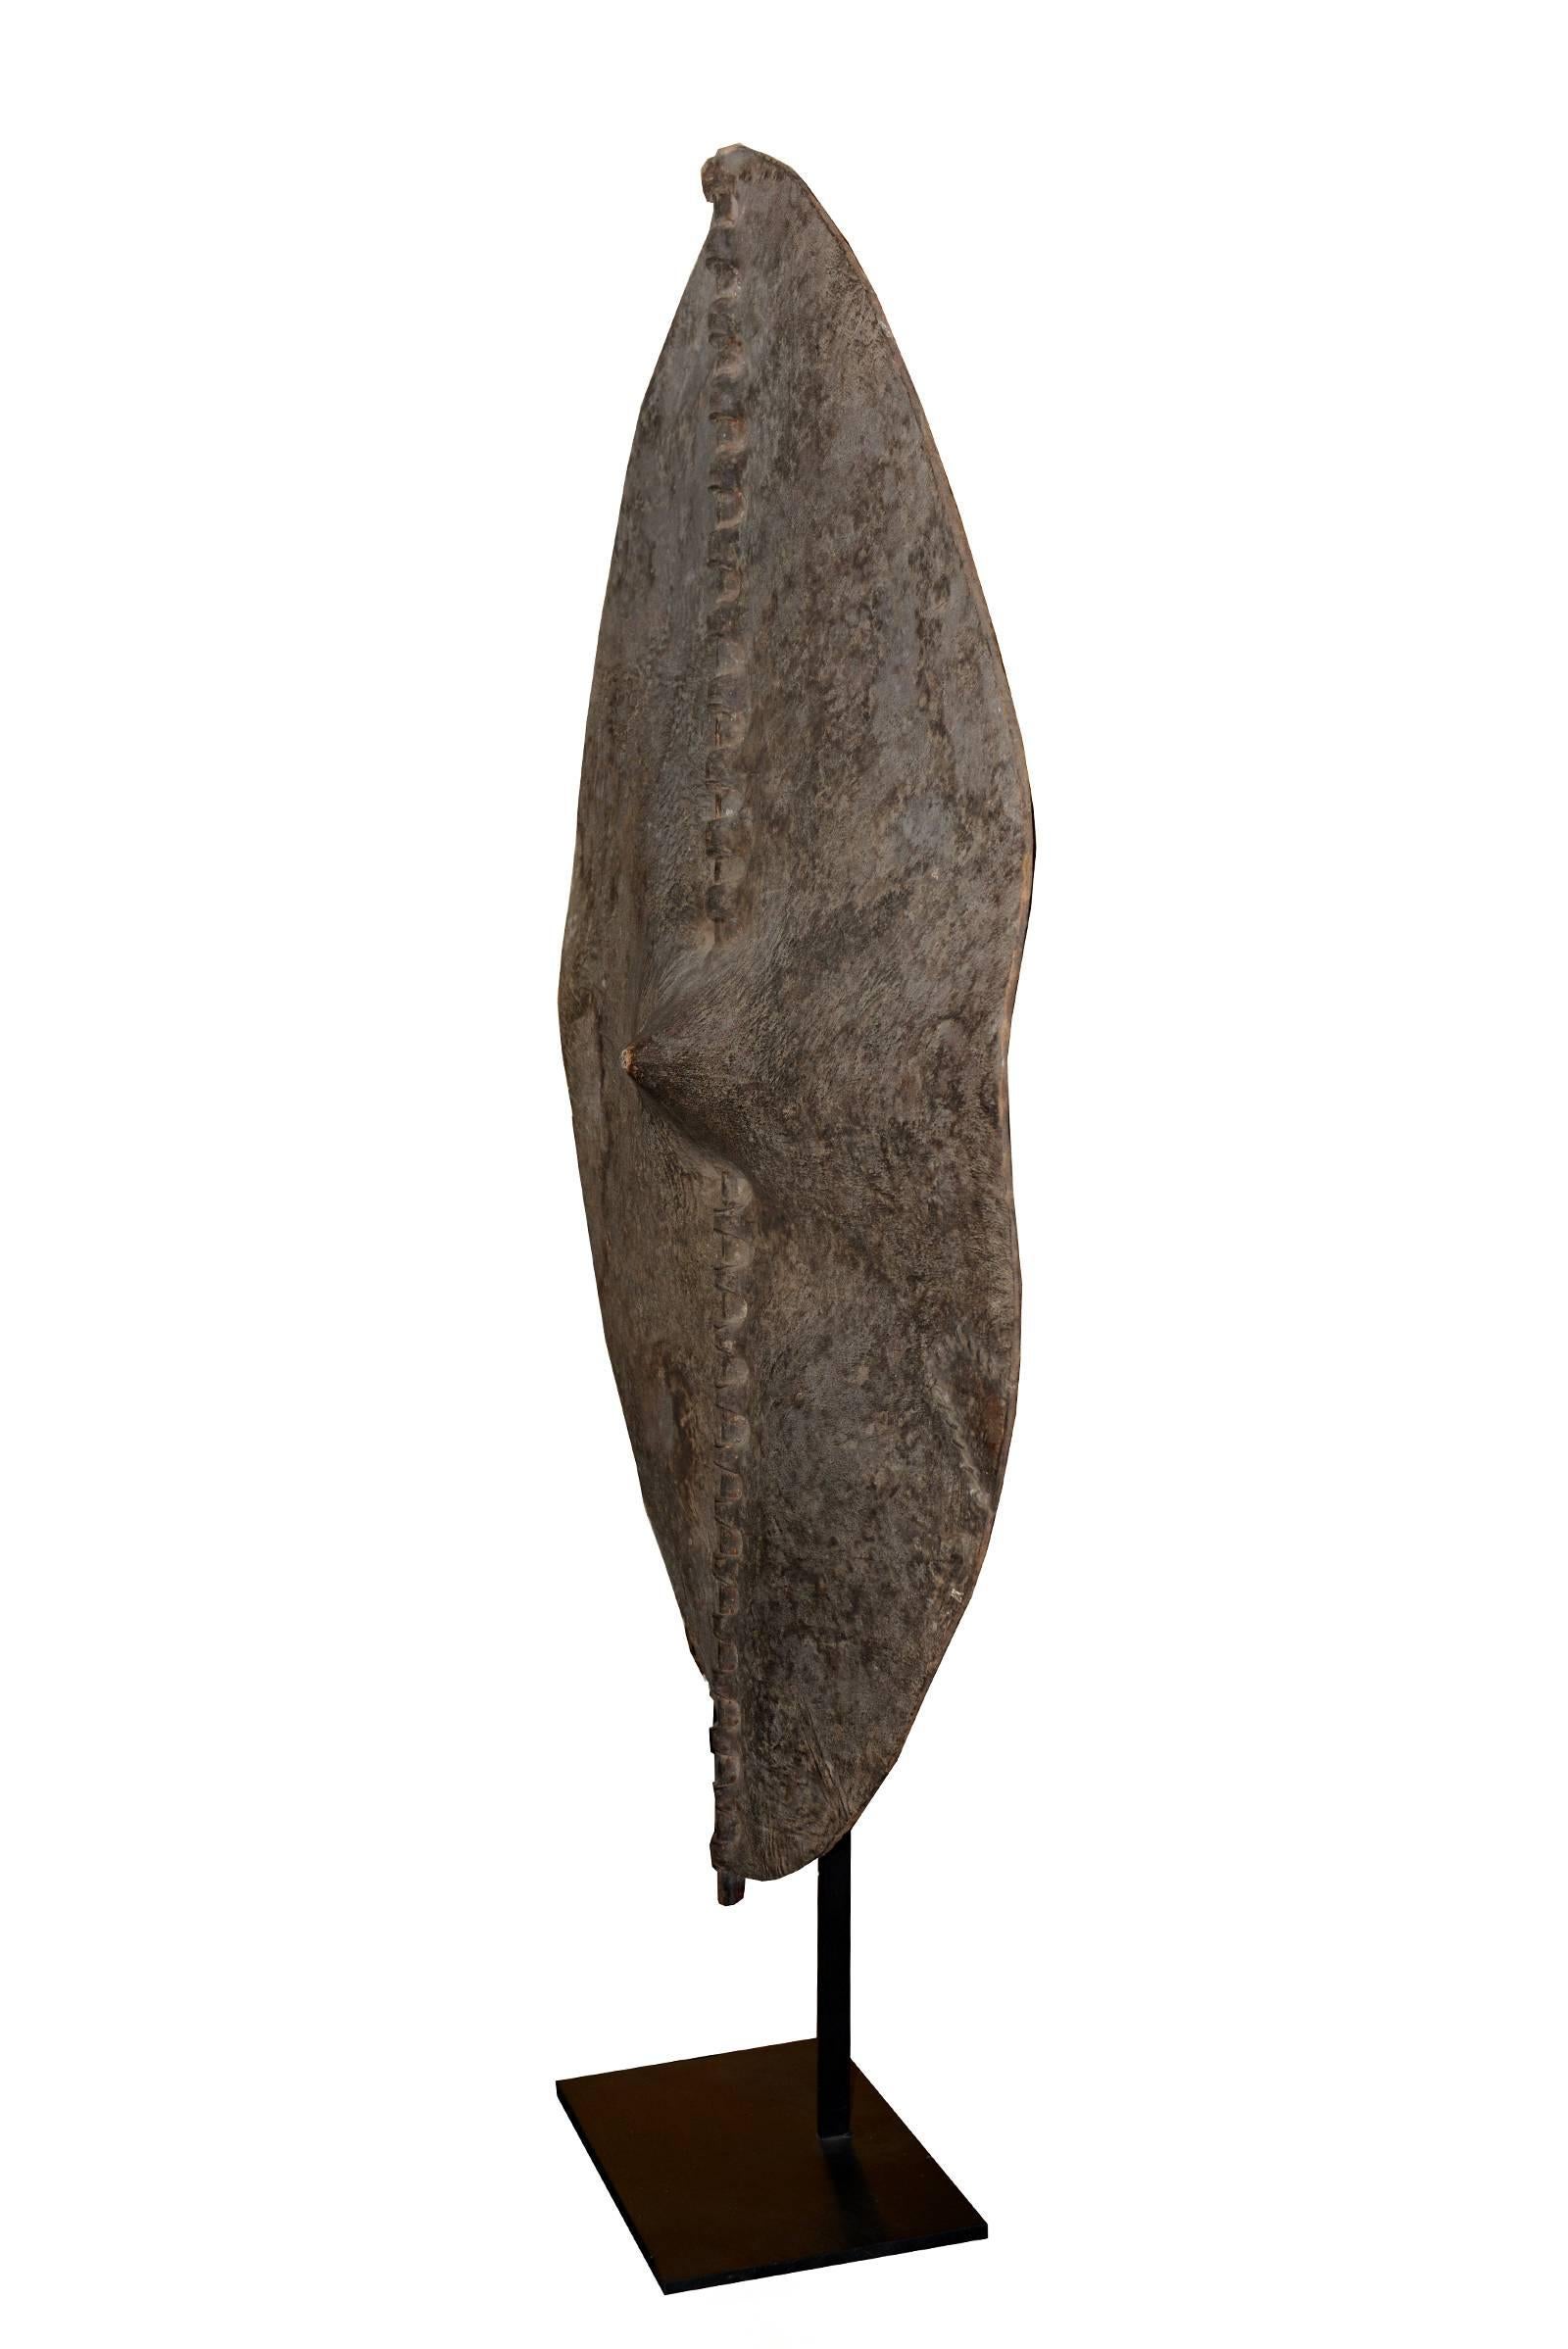 African Shield Dinka from South Sudan, early 20th century.
Base: 28 x 22 cm.
